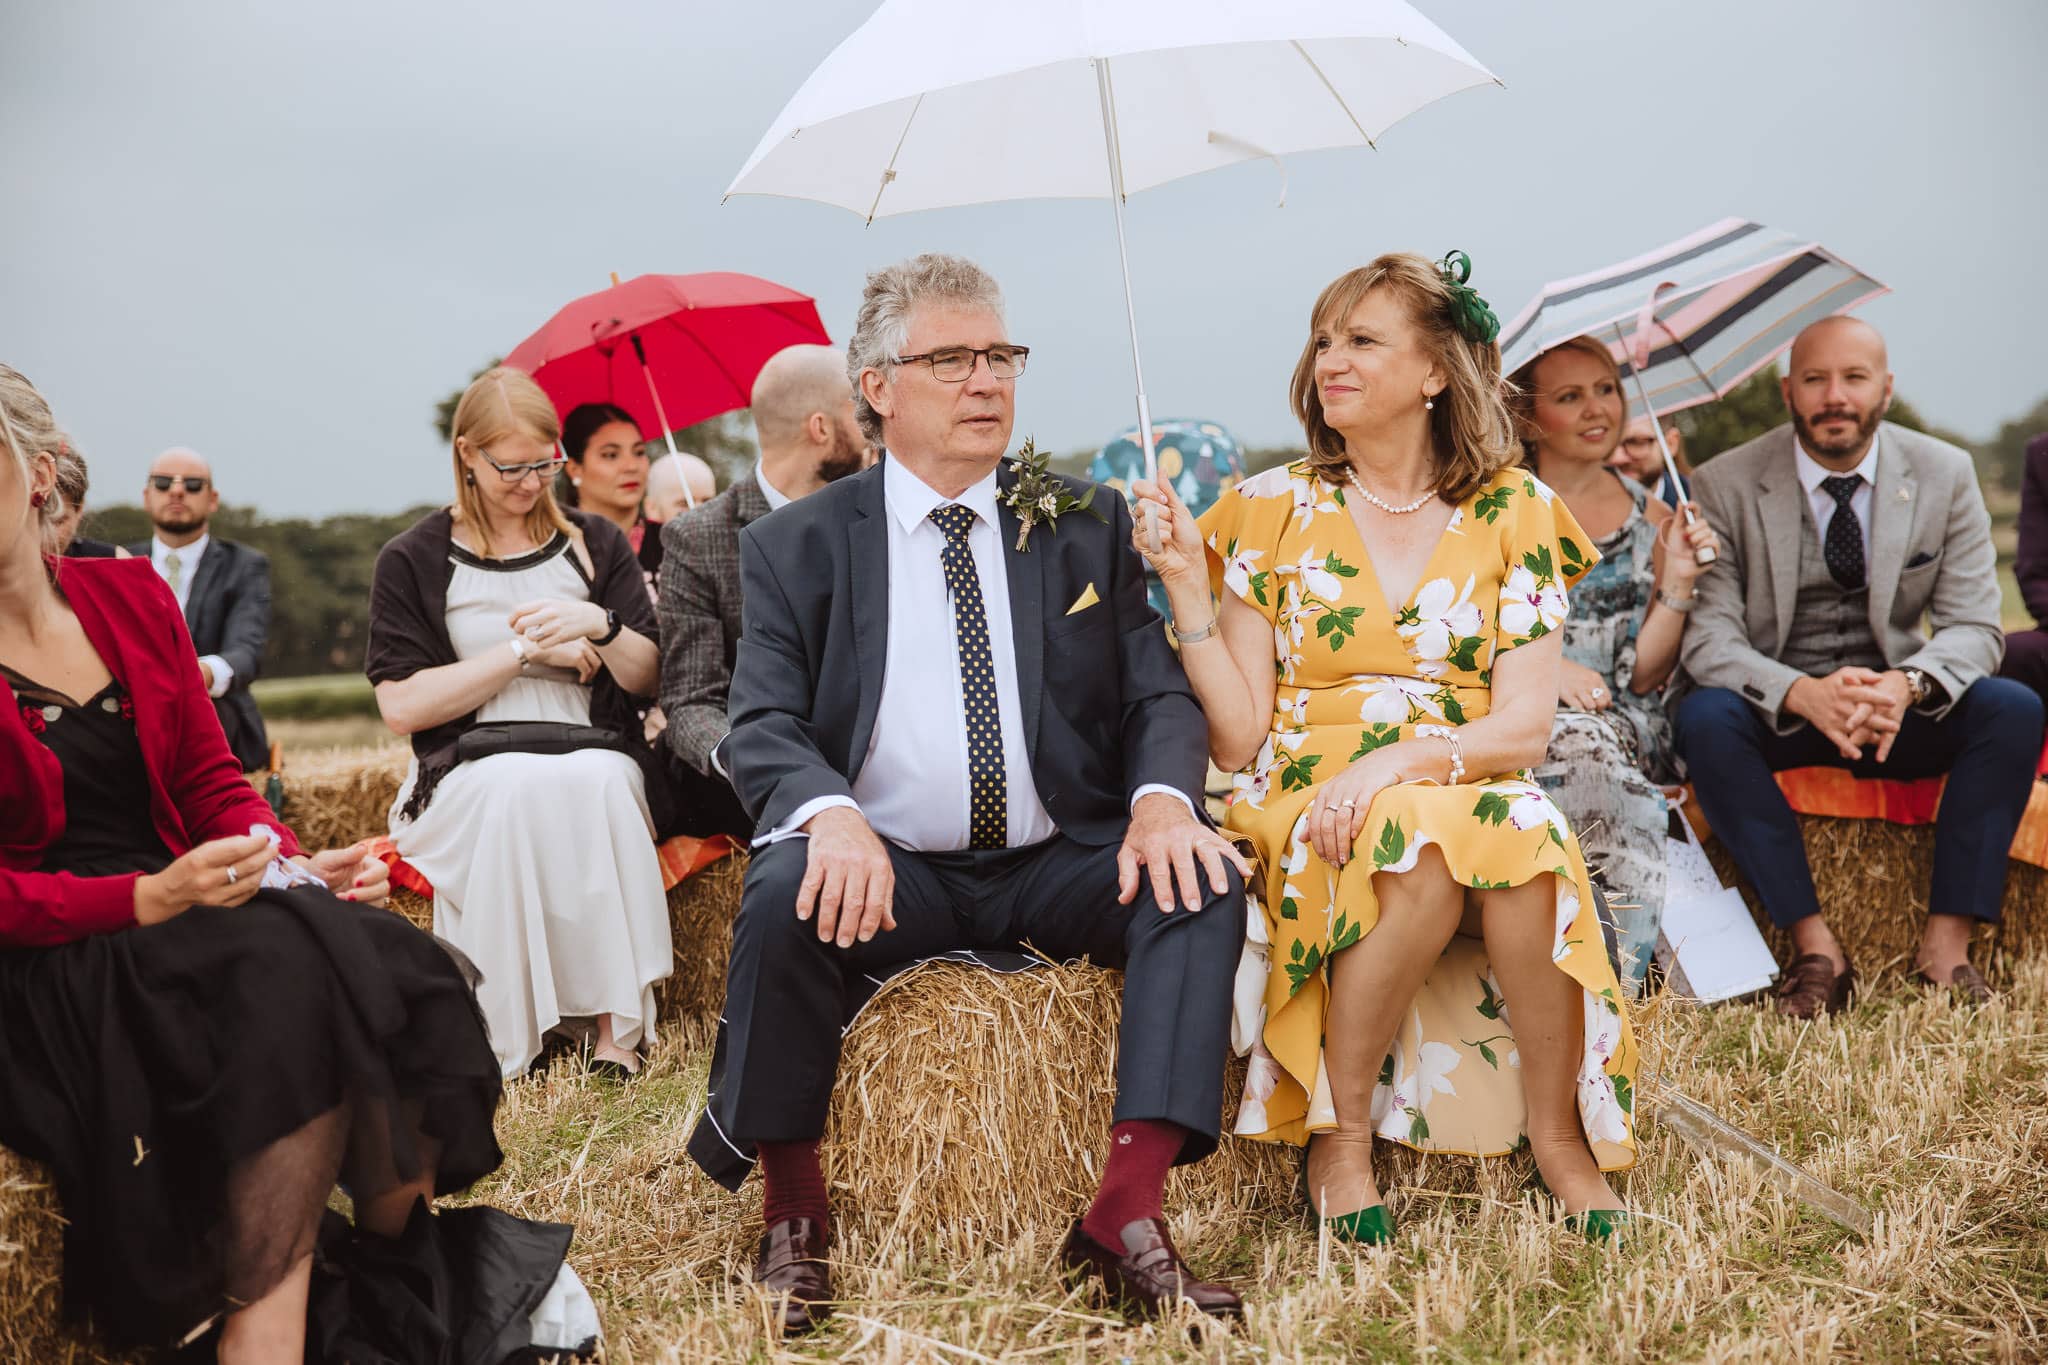 wedding guests seated on hay bales for outdoor wedding ceremony